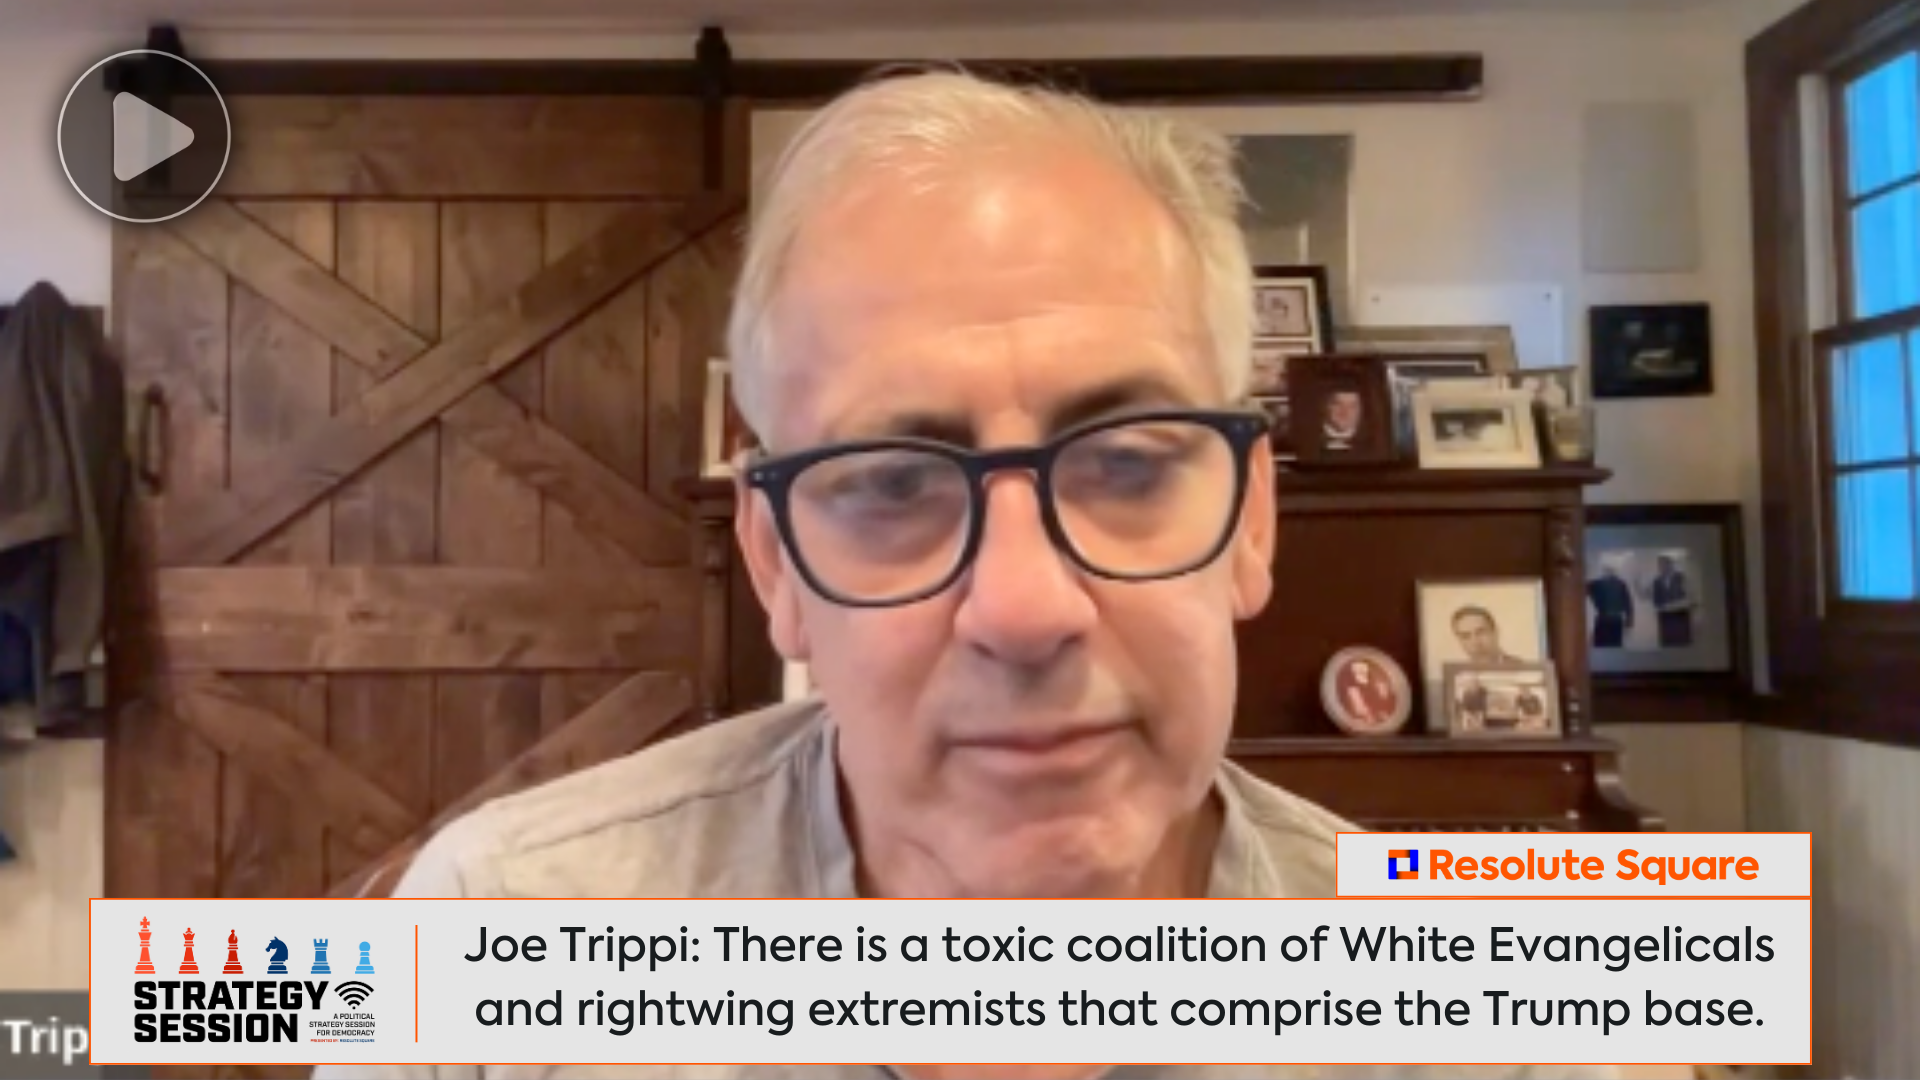 Joe Trippi describes the toxic coalition of White Evangelicals and rightwing extremists who comprise Trump's base of support. 